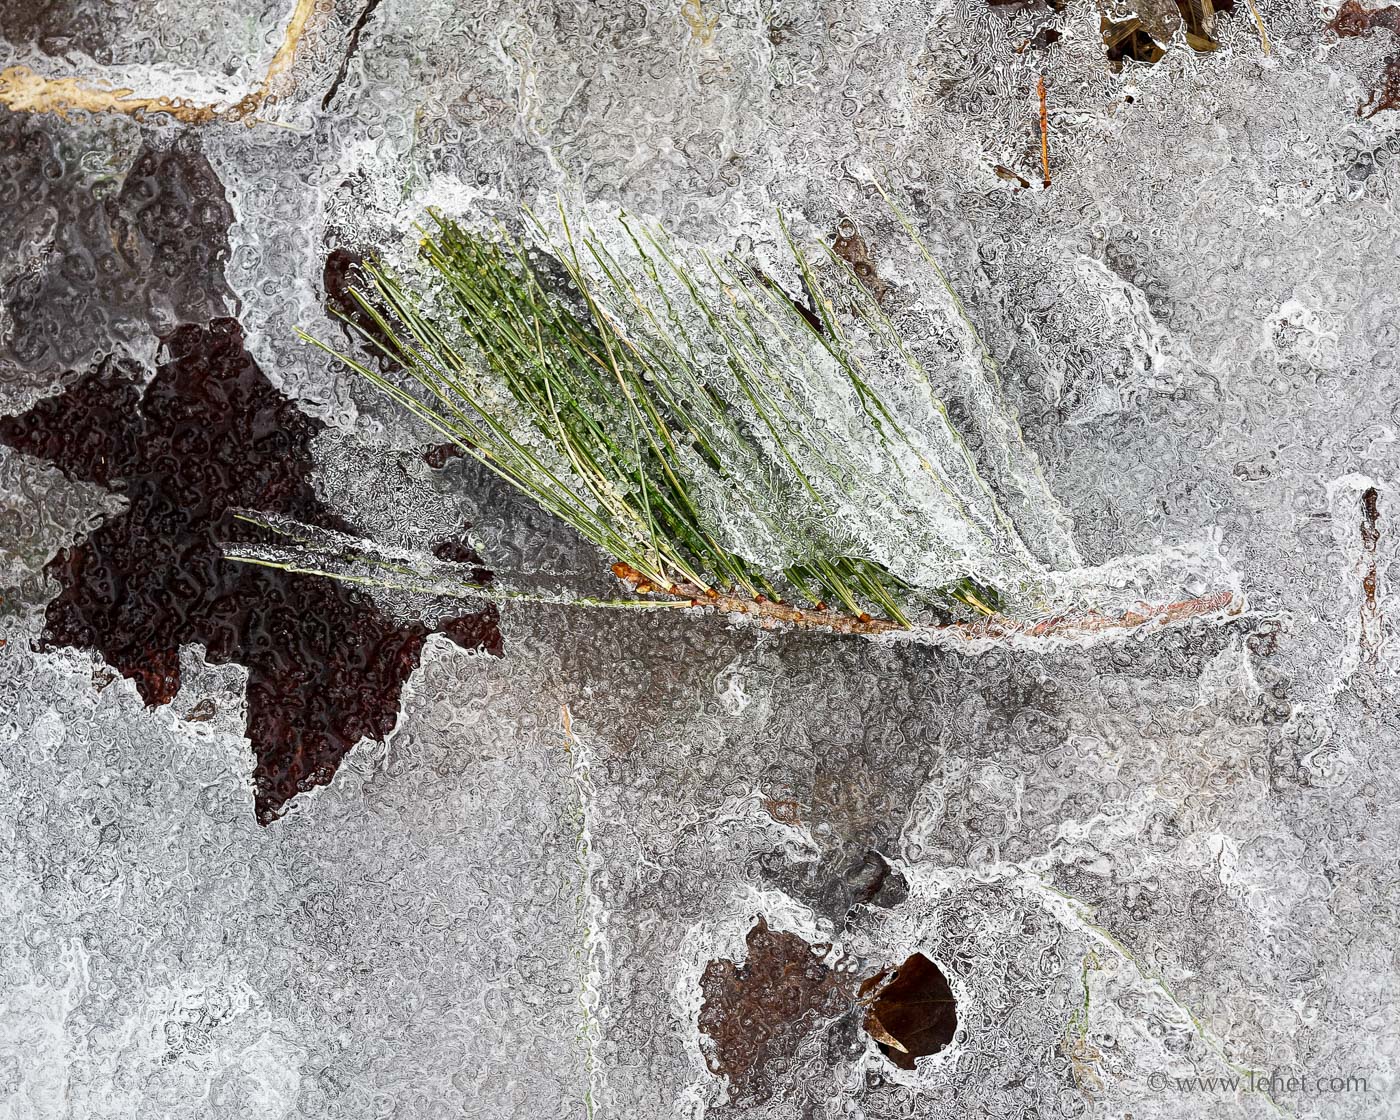 Pine Sprig in Spring Ice with Brown Maple Leaf